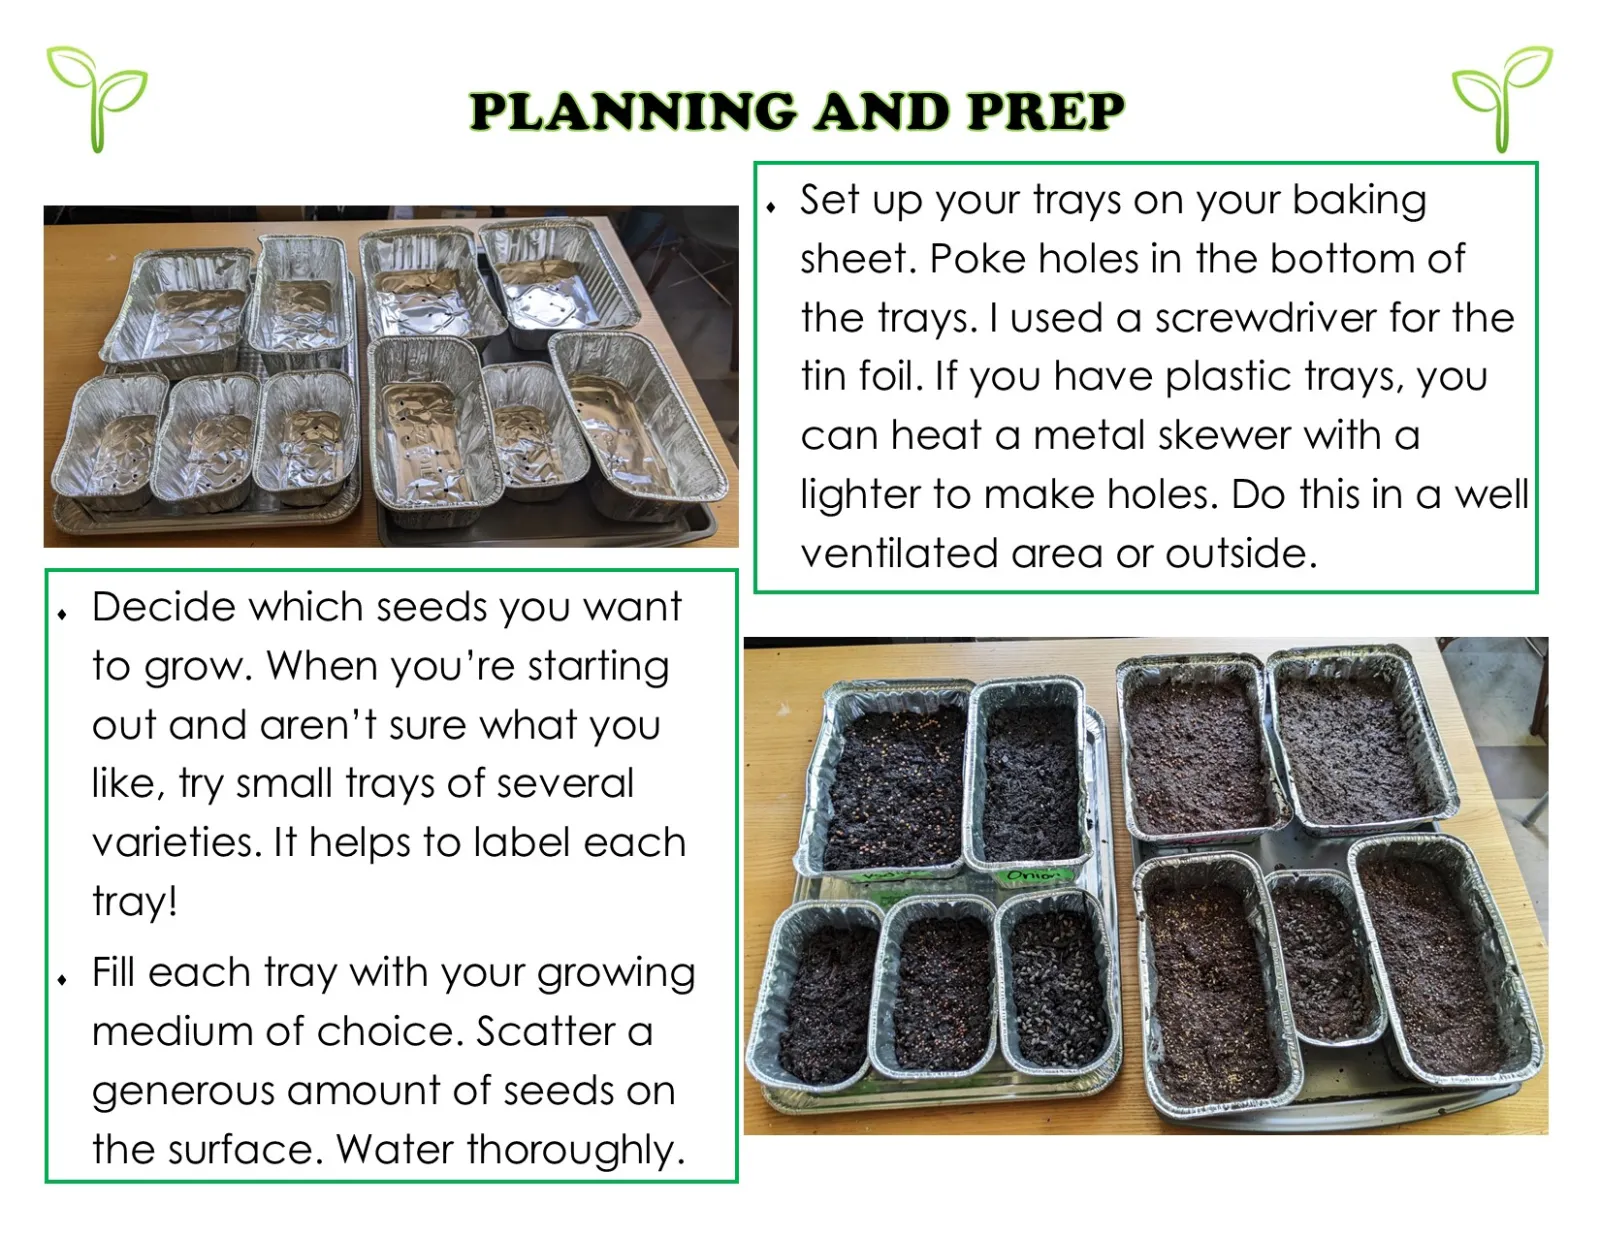 This is a wall of text about planning and prepping to grow microgreens